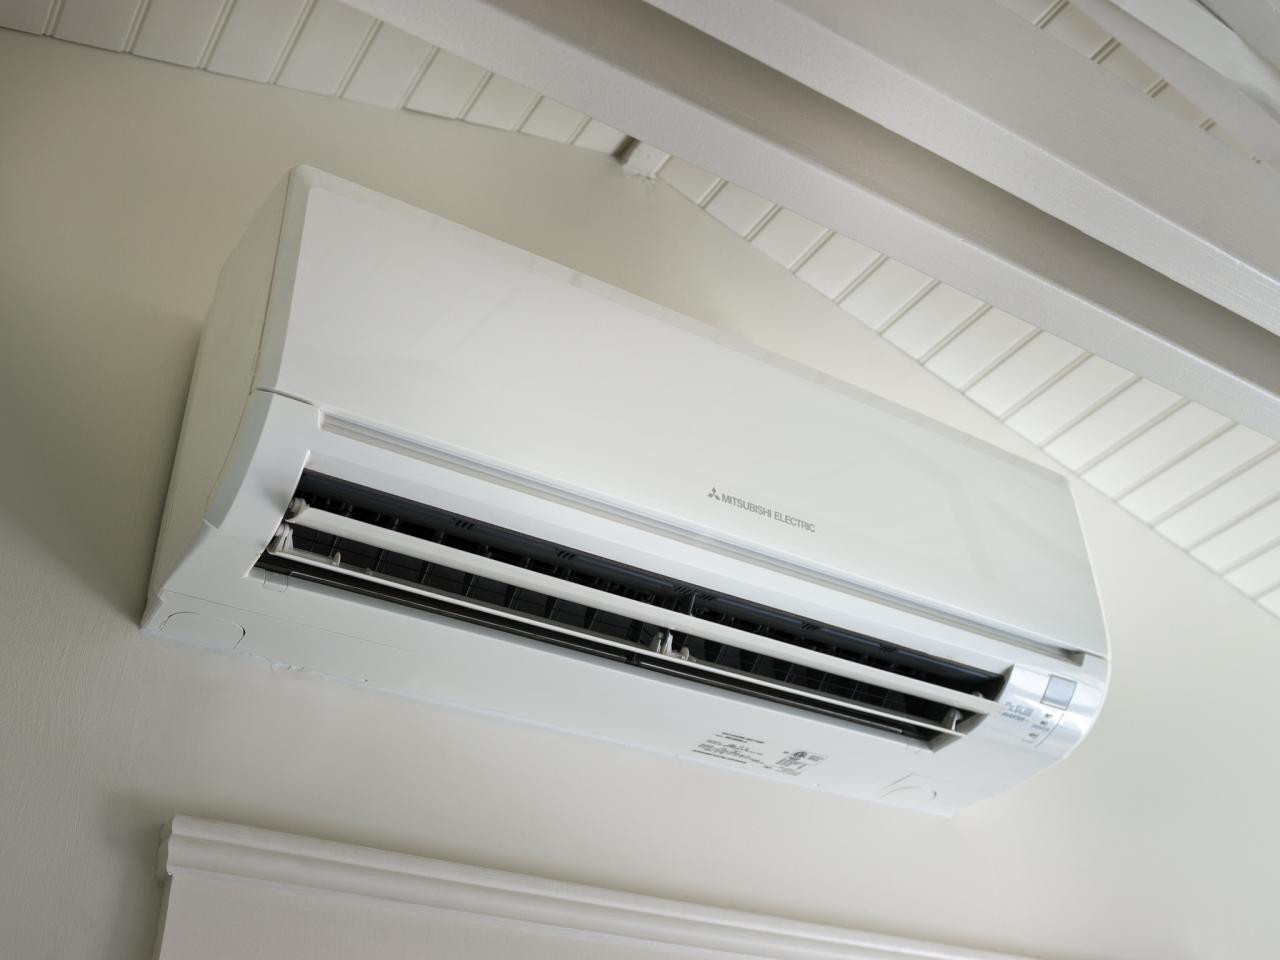 one room heating and air conditioning units